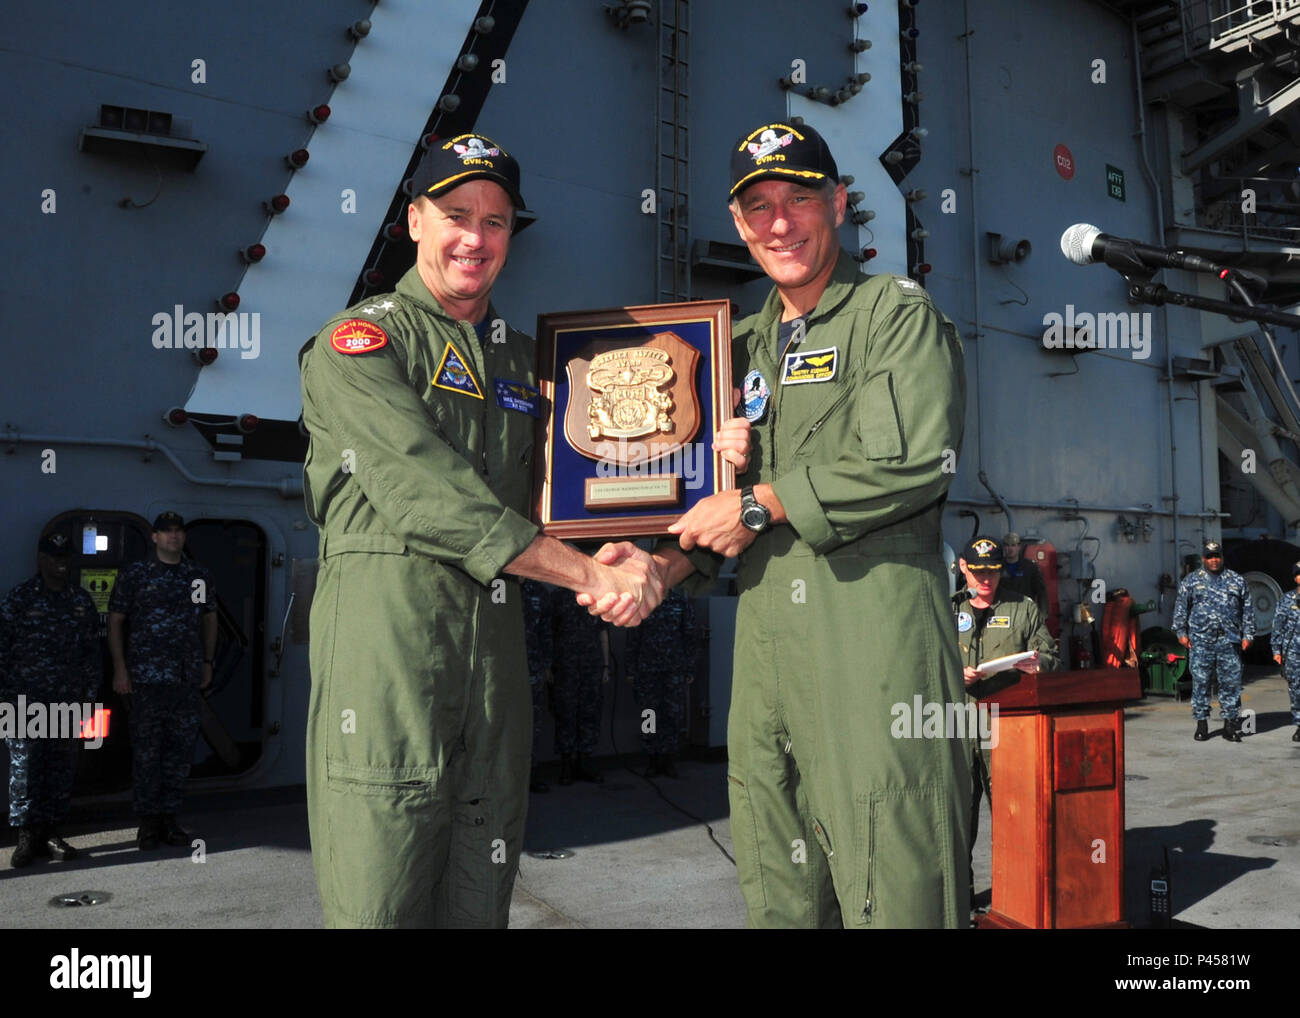 20160614-N-TR801-050 NORFOLK (June 14, 2016) Vice Adm. Michael Shoemaker, left, commander, Naval Air Forces, presents a 2015 Admiral Flatley Memorial Award plaque to Capt. Timothy C. Kuehhas, commanding officer of the aircraft carrier USS George Washington (CVN 73) during an all hands call on the flight deck.  The Admiral Flatley Memorial Award is based on the overall aviation safety record of the ship and air wing, as well as a type commander assessment of the ship’s safety program.  (U.S. Navy photo by Mass Communication Specialist Seaman Michael E. Wiese/Released) Stock Photo